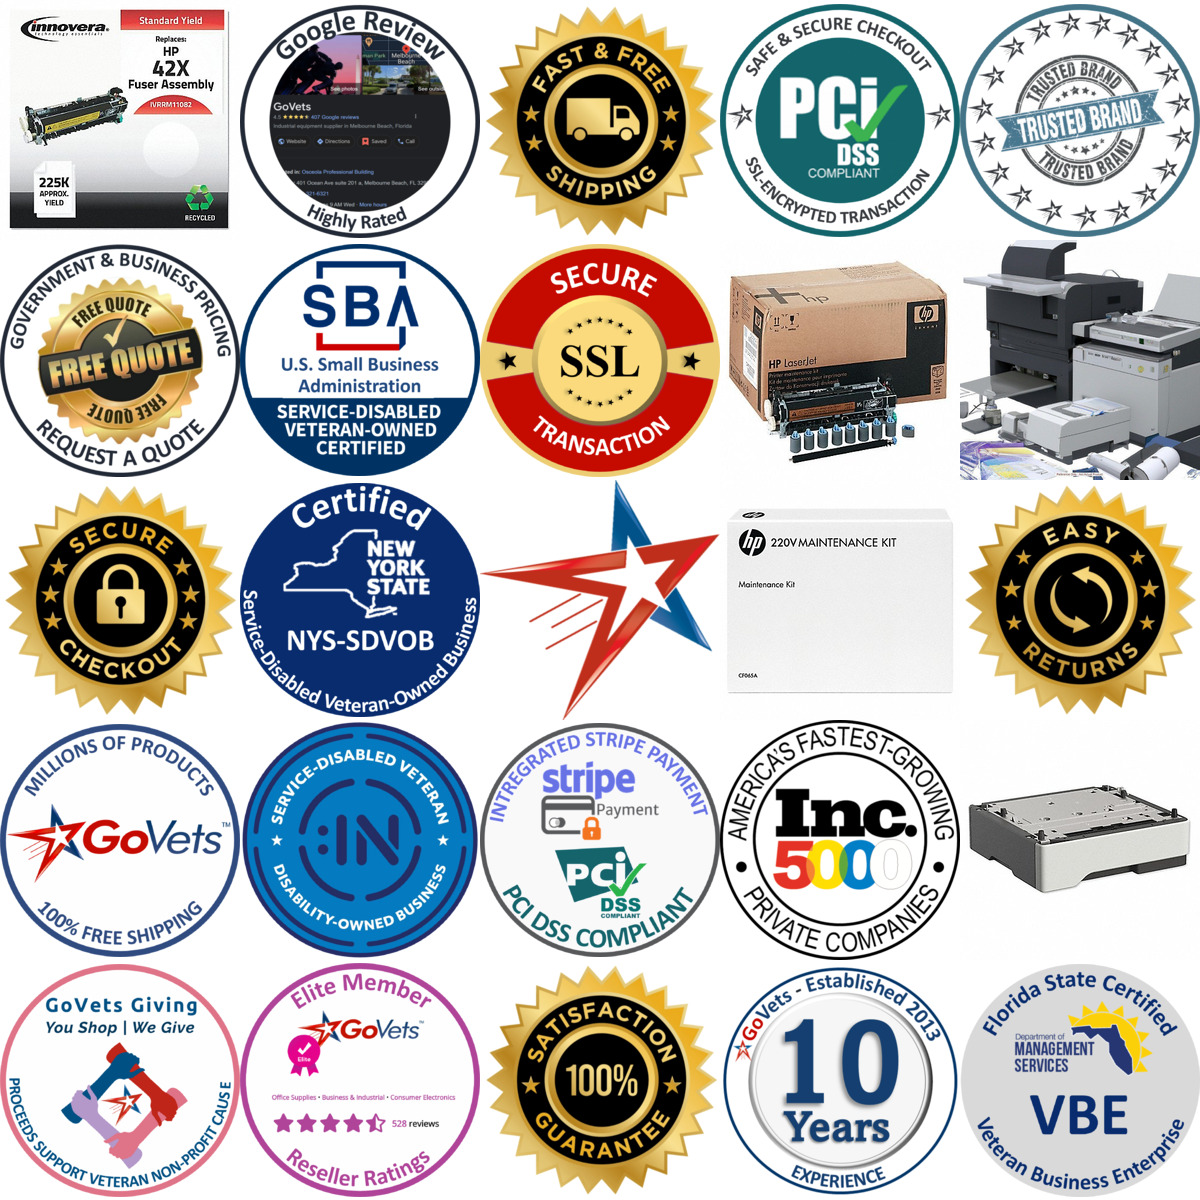 A selection of Printer Accessories products on GoVets